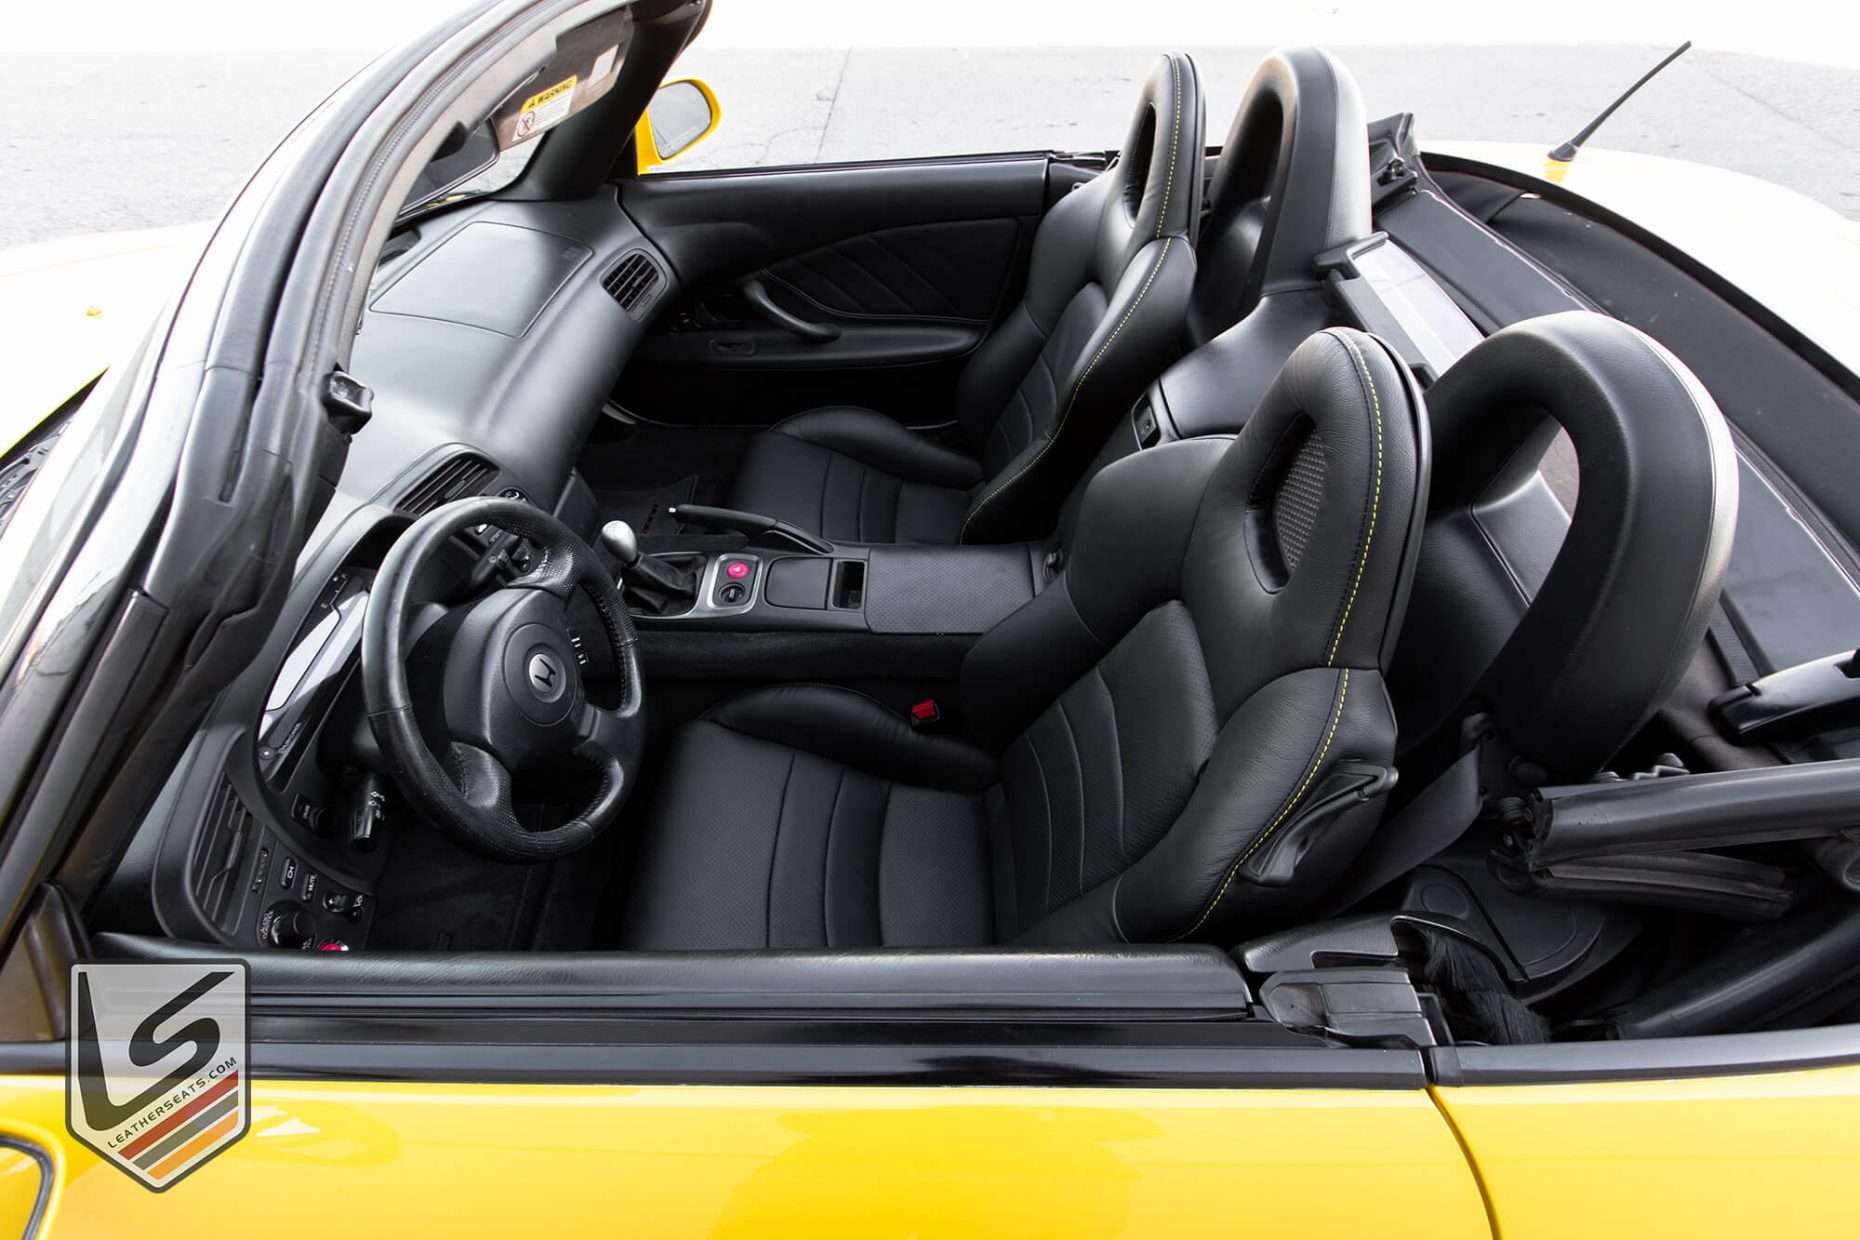 Alternative aerial view of installed leather seats for Honda S2000 Roadster